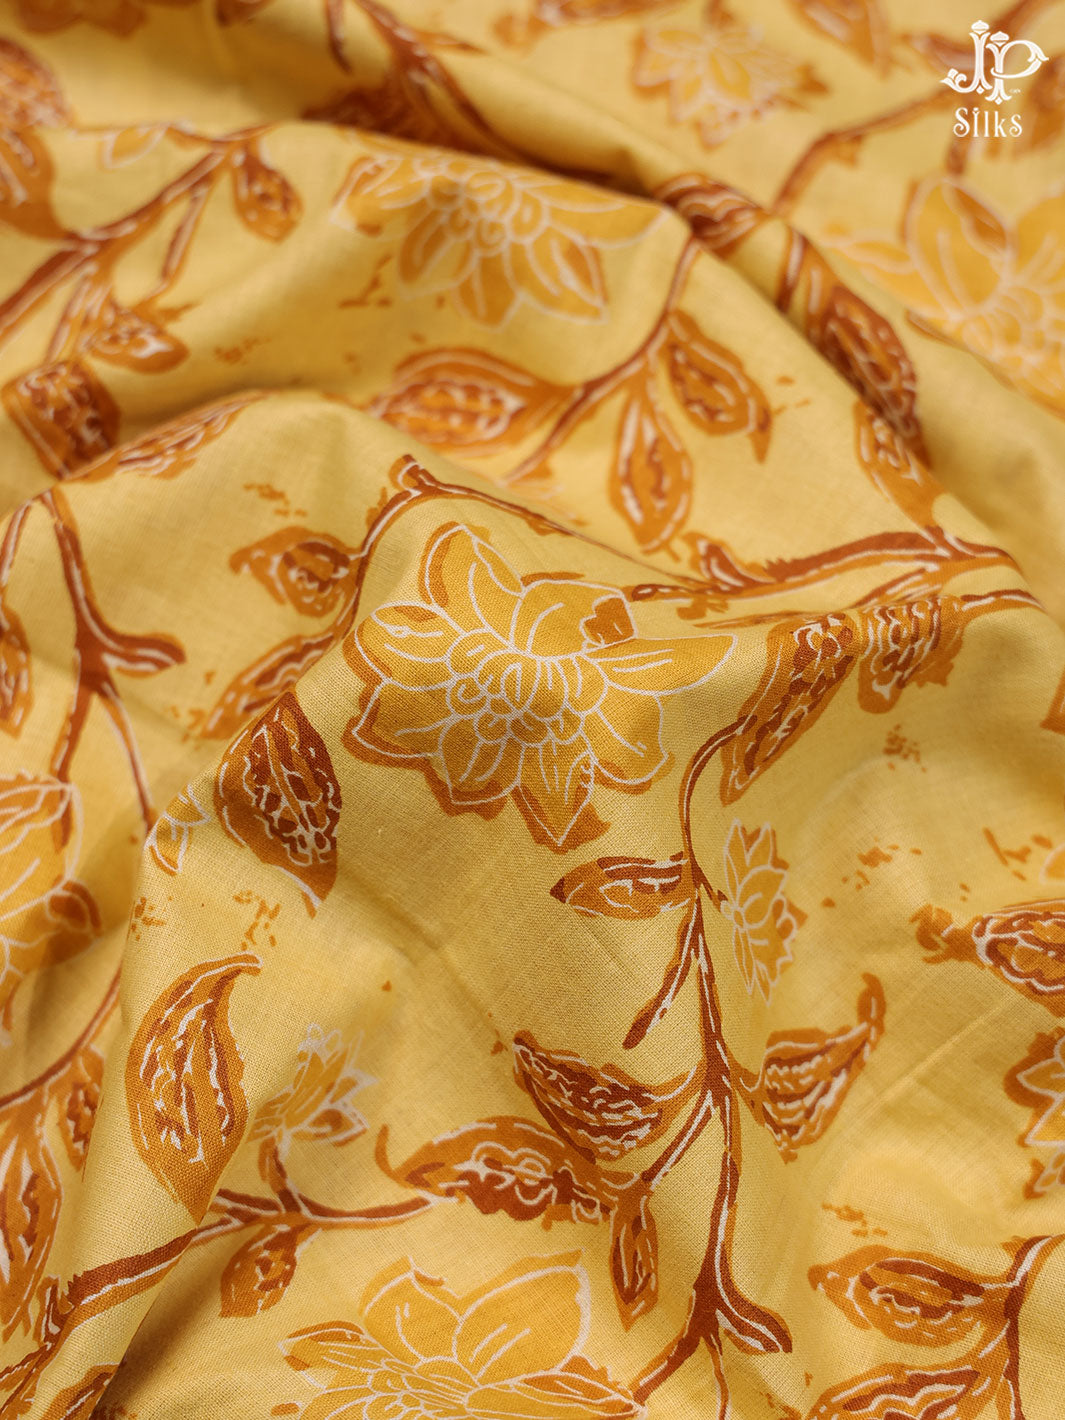 Yellow and White Cotton Chudidhar Material - C4379 - View 5